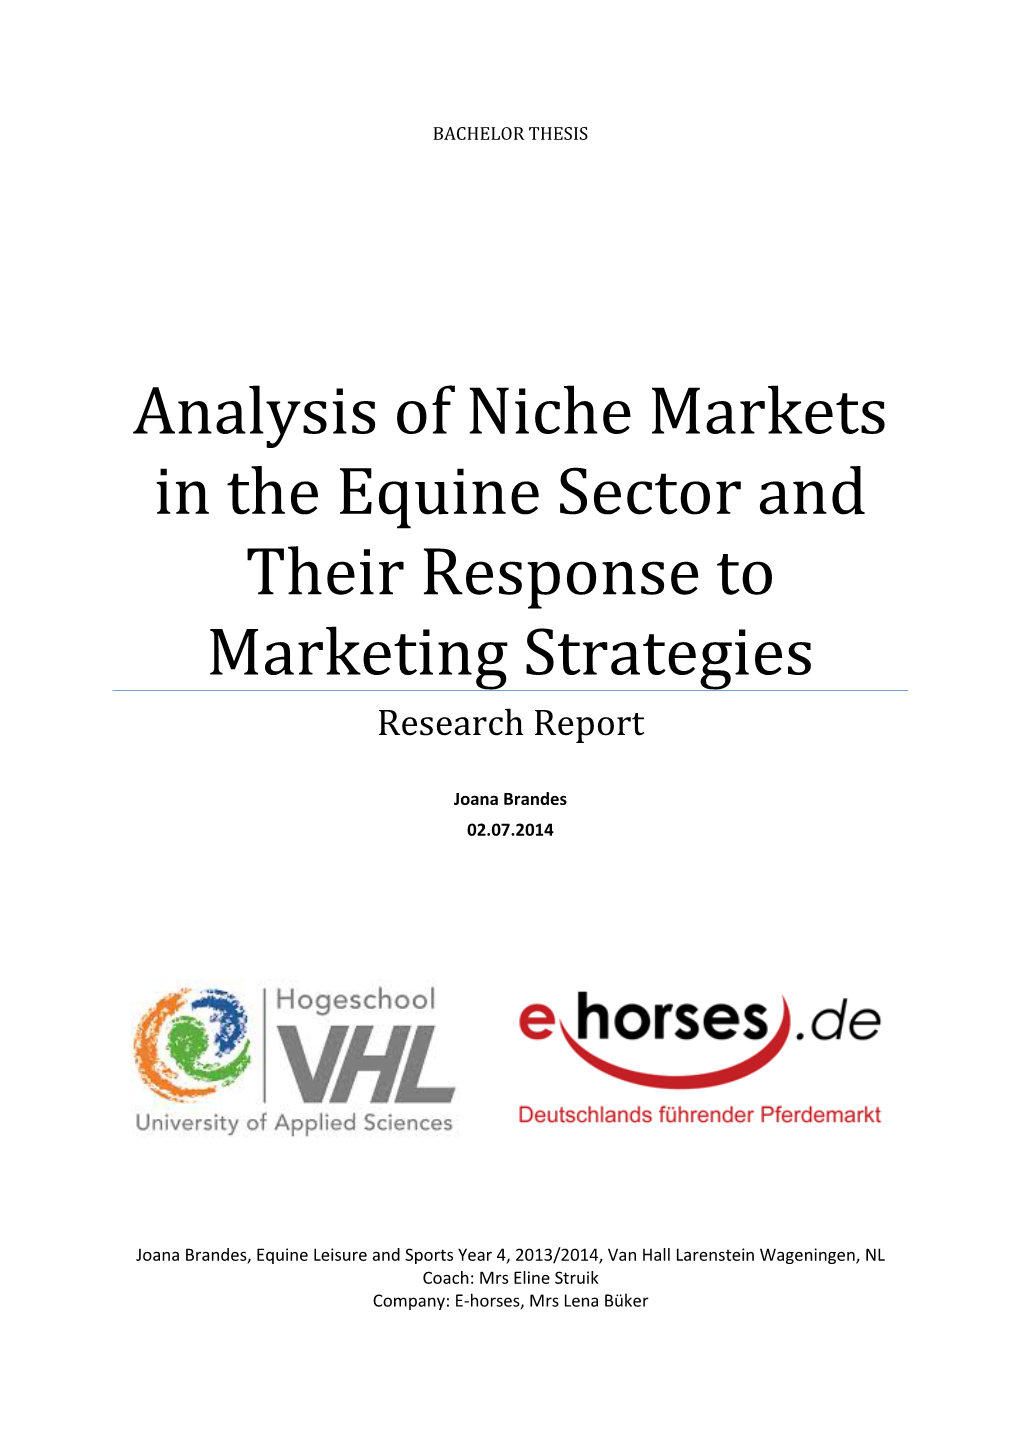 Analysis of Niche Markets in the Equine Sector and Their Response to Marketing Strategies Research Report